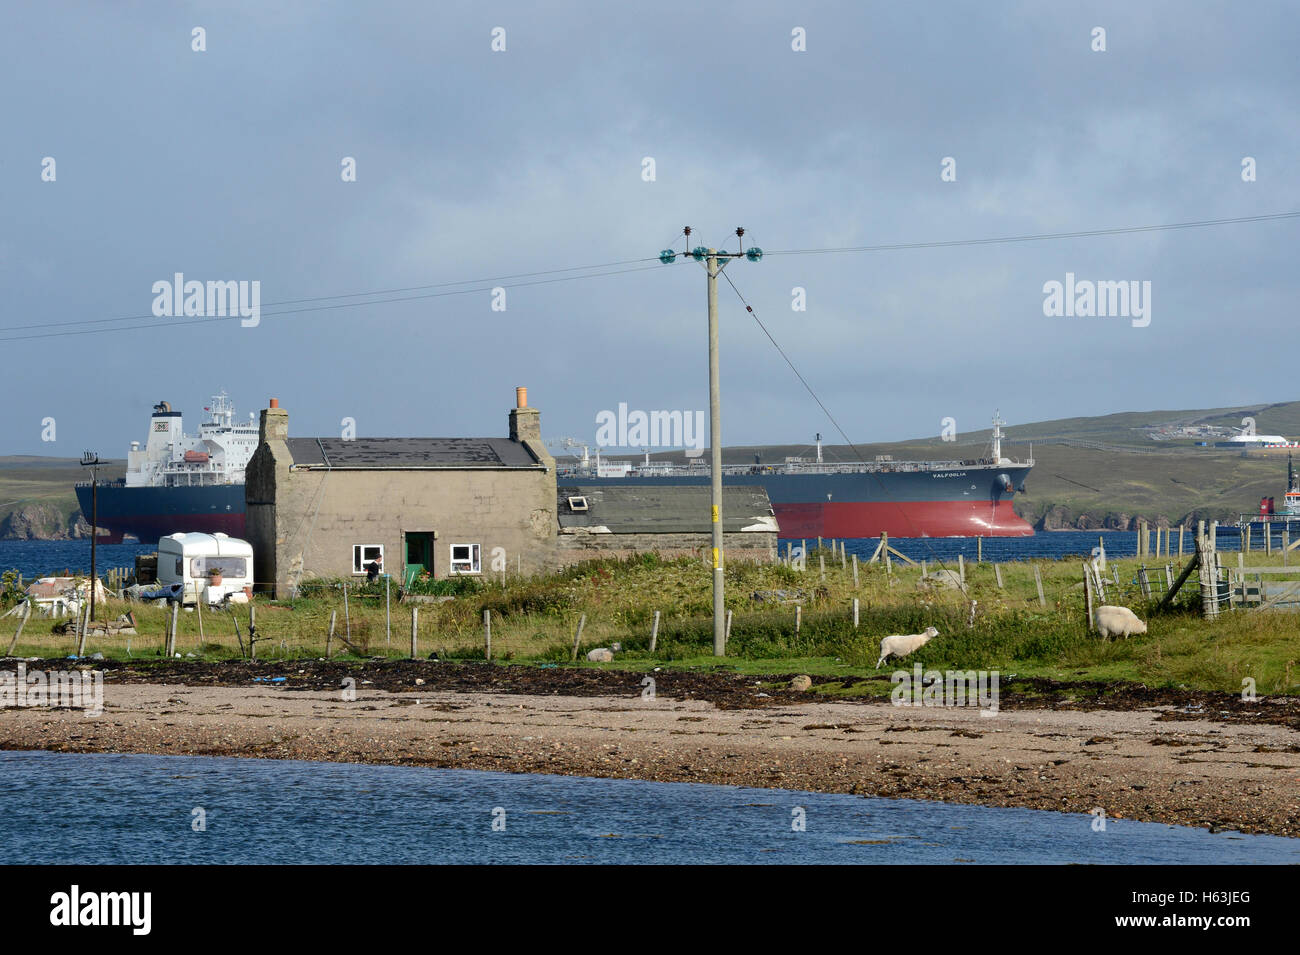 Oil Tanker entering the port of Sullom Voe to load Brent or Clair Crude oil from the north sea oil fields Stock Photo